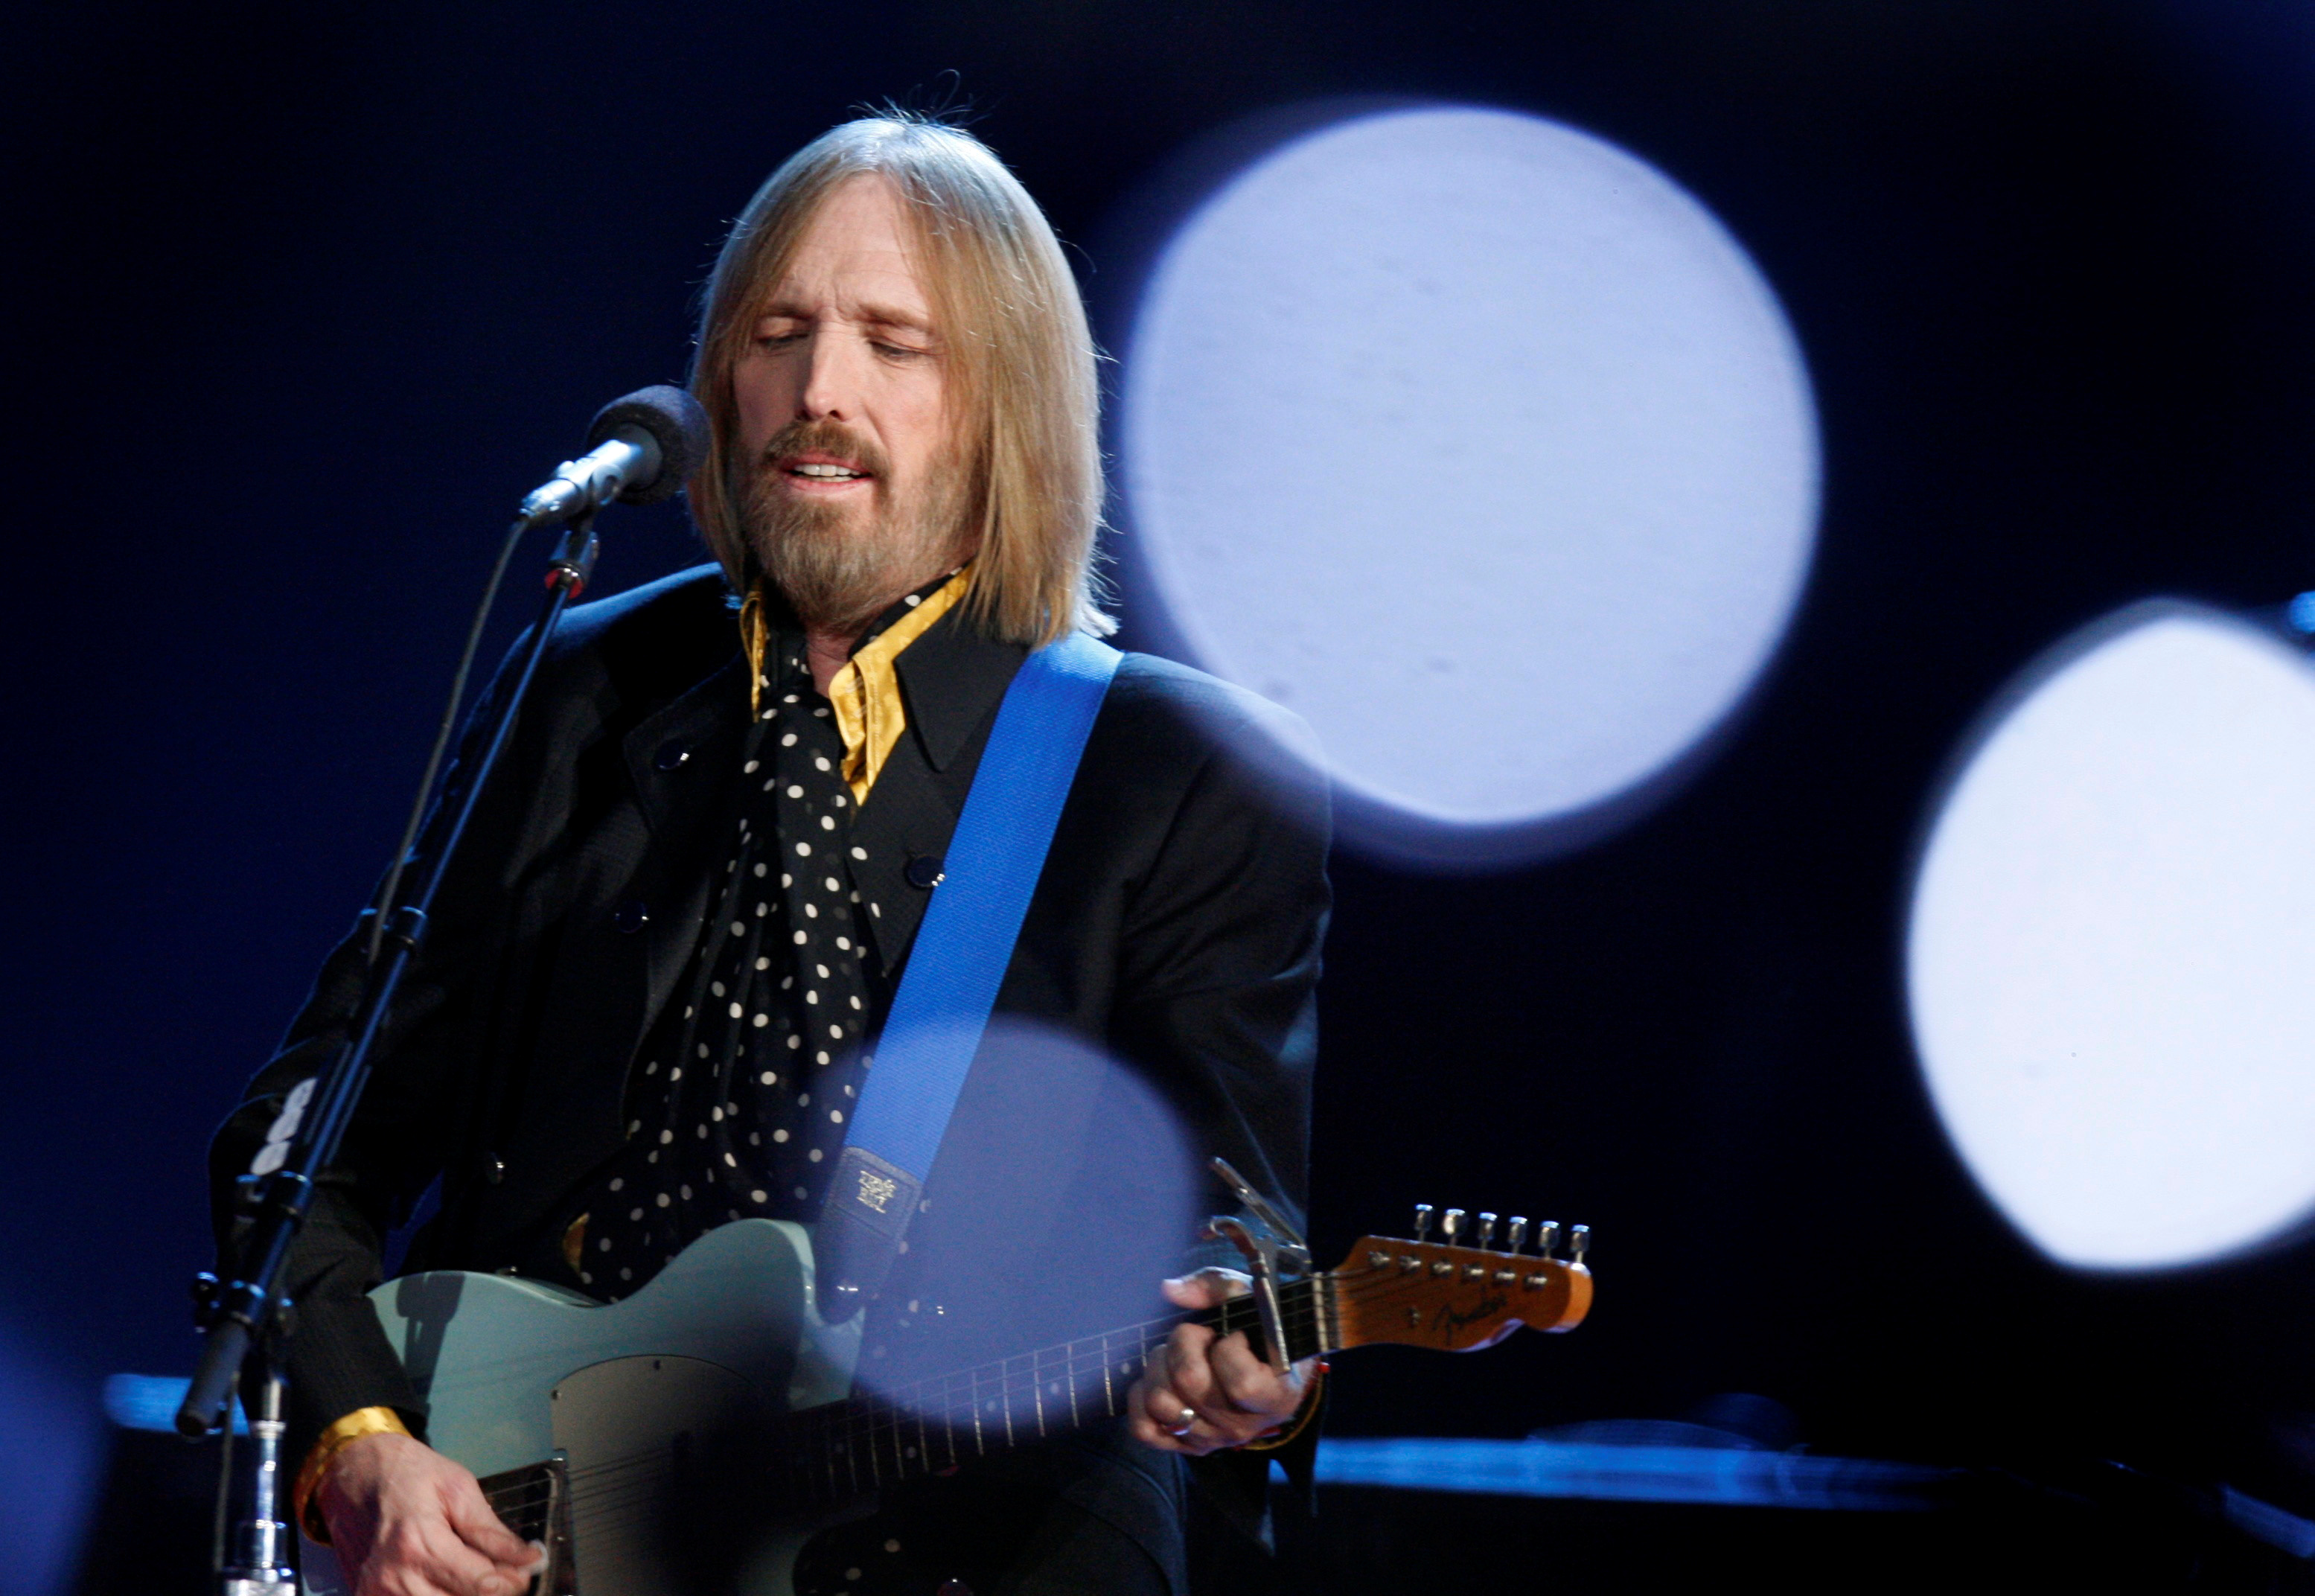 FILE PHOTO: Singer and songwriter Tom Petty performs during the half time show of the NFL's Super Bowl XLII football game between the New England Patriots and the New York Giants in Glendale, Arizona February 3, 2008.     REUTERS/Lucy Nicholson/File Photo